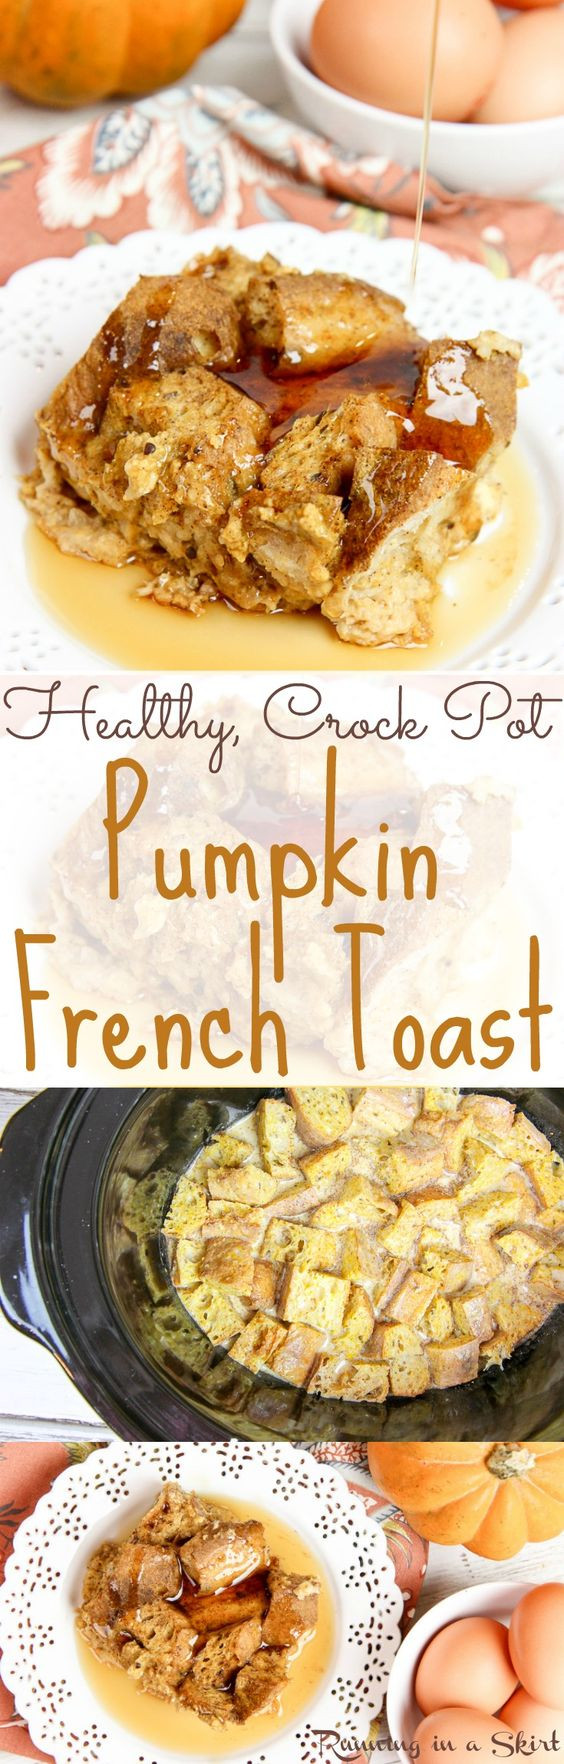 Overnight Crock Pot French Toast Great For Christmas Morning
 Healthy Crock Pot Pumpkin French Toast casserole recipe